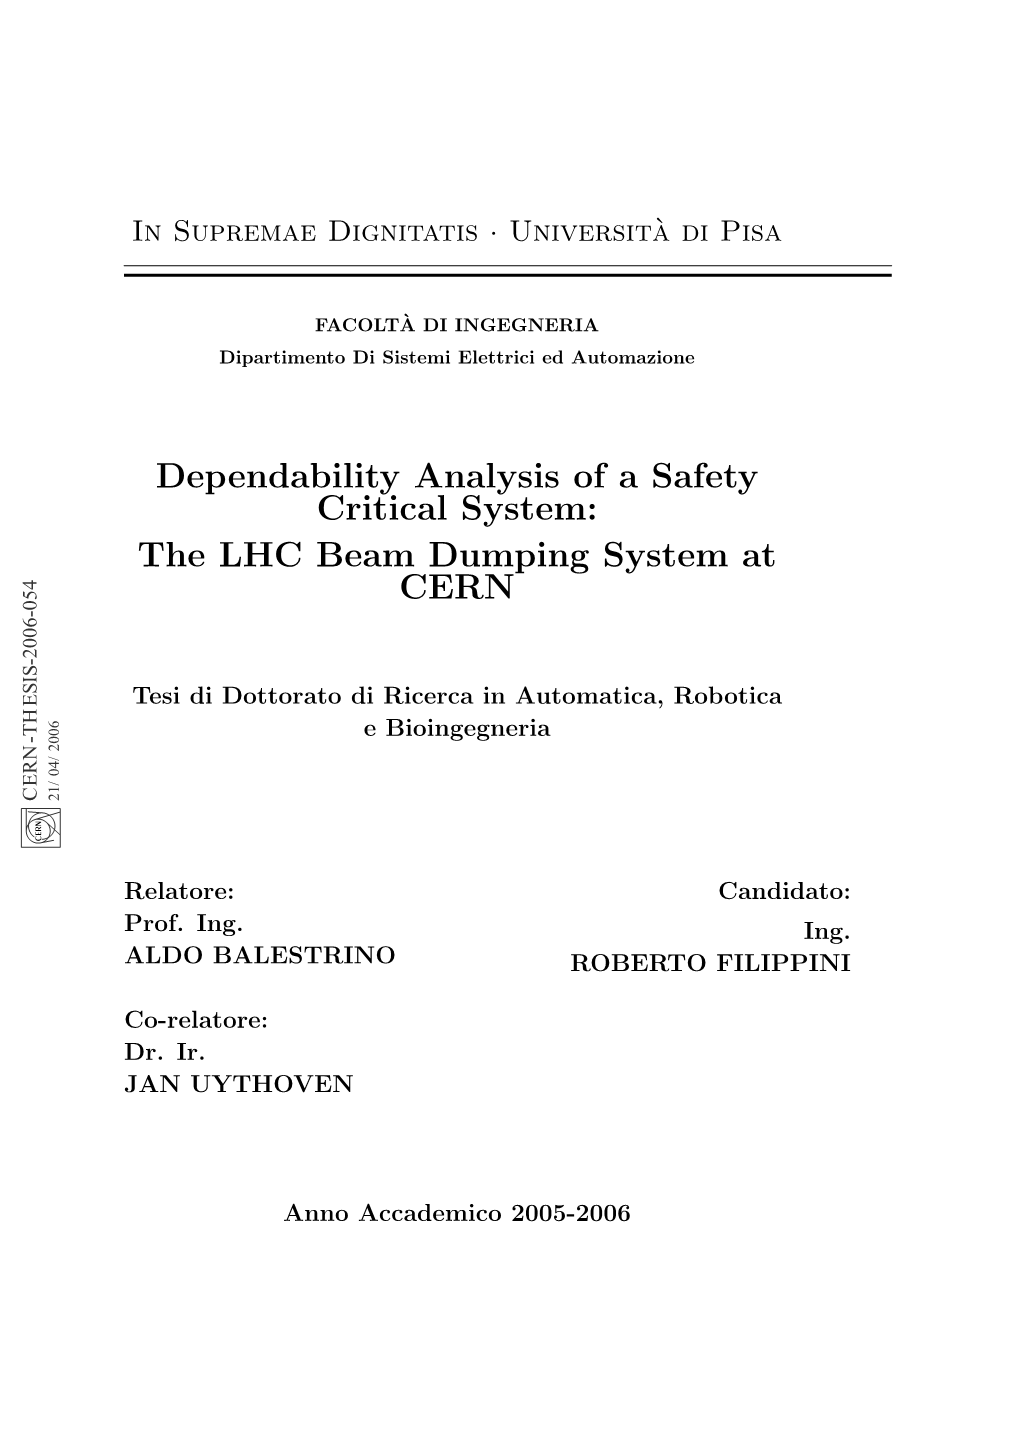 Dependability Analysis of a Safety Critical System: the LHC Beam Dumping System at CERN